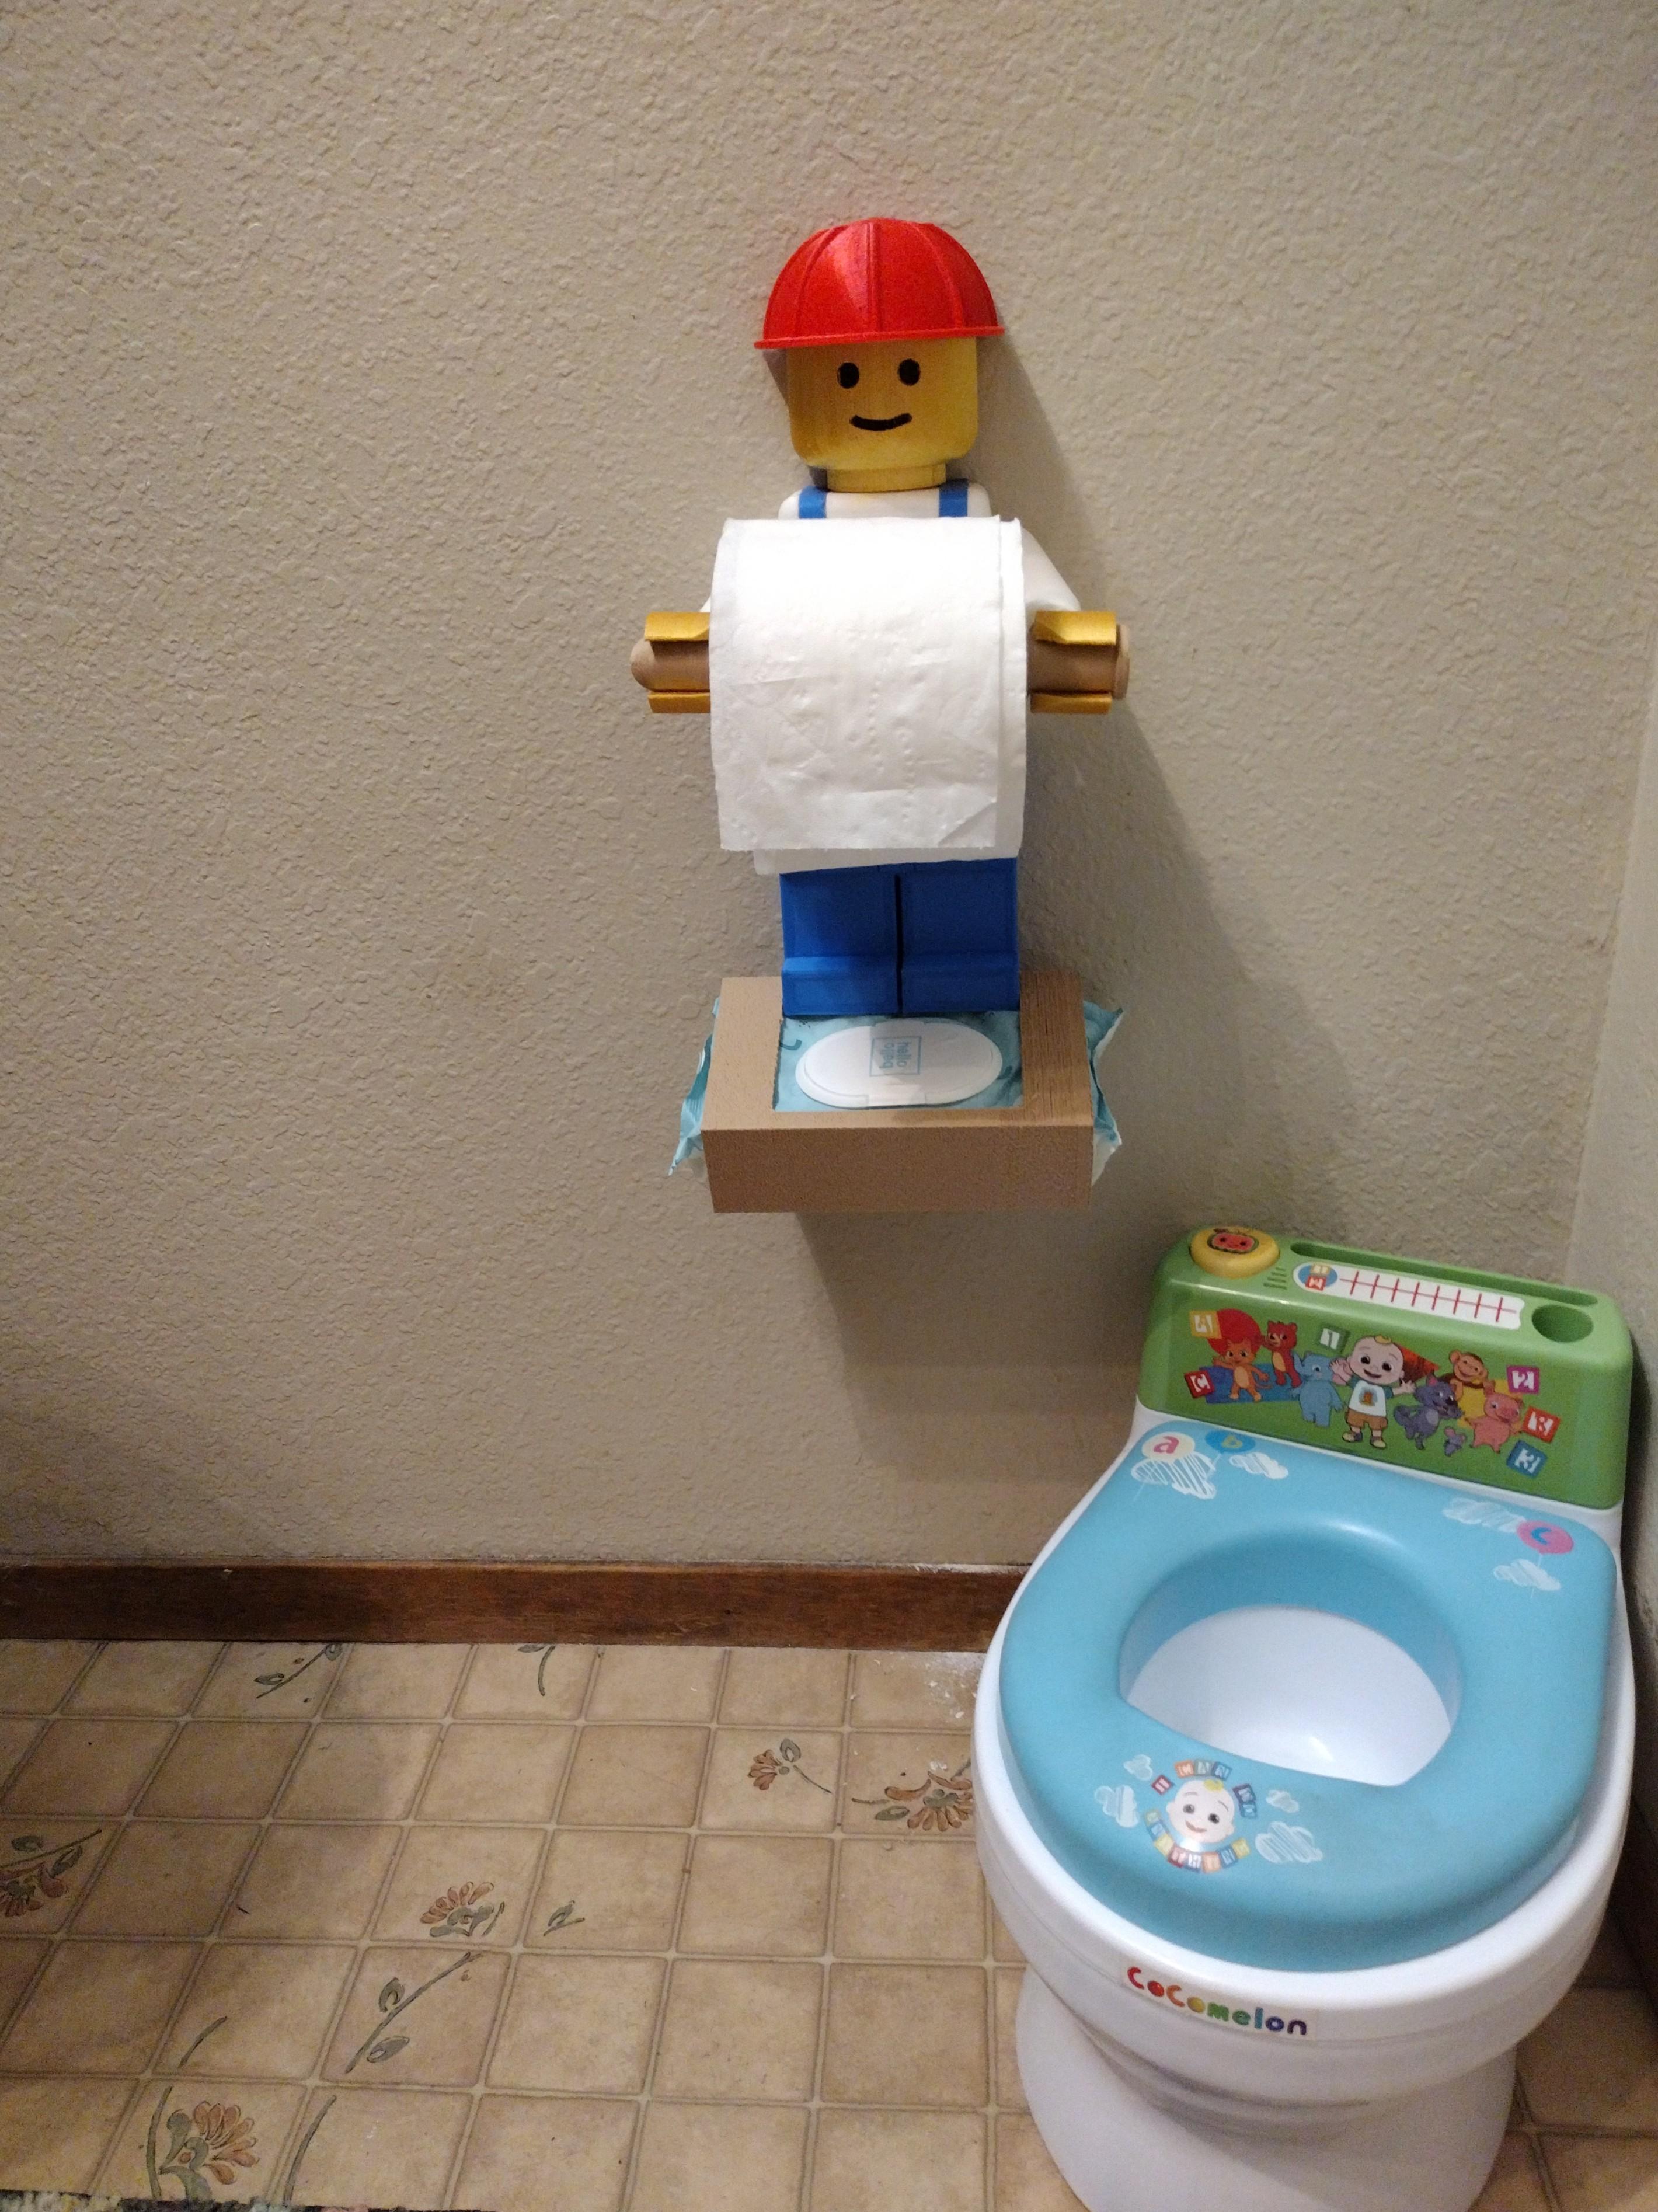 LEGO Toilet paper holder - My Great Granddaughter had to have a place for her "Wet wipes", so I added a fixture to slip in a standard pkg of wet wipes at the bottom.
She "Loves it". - 3d model